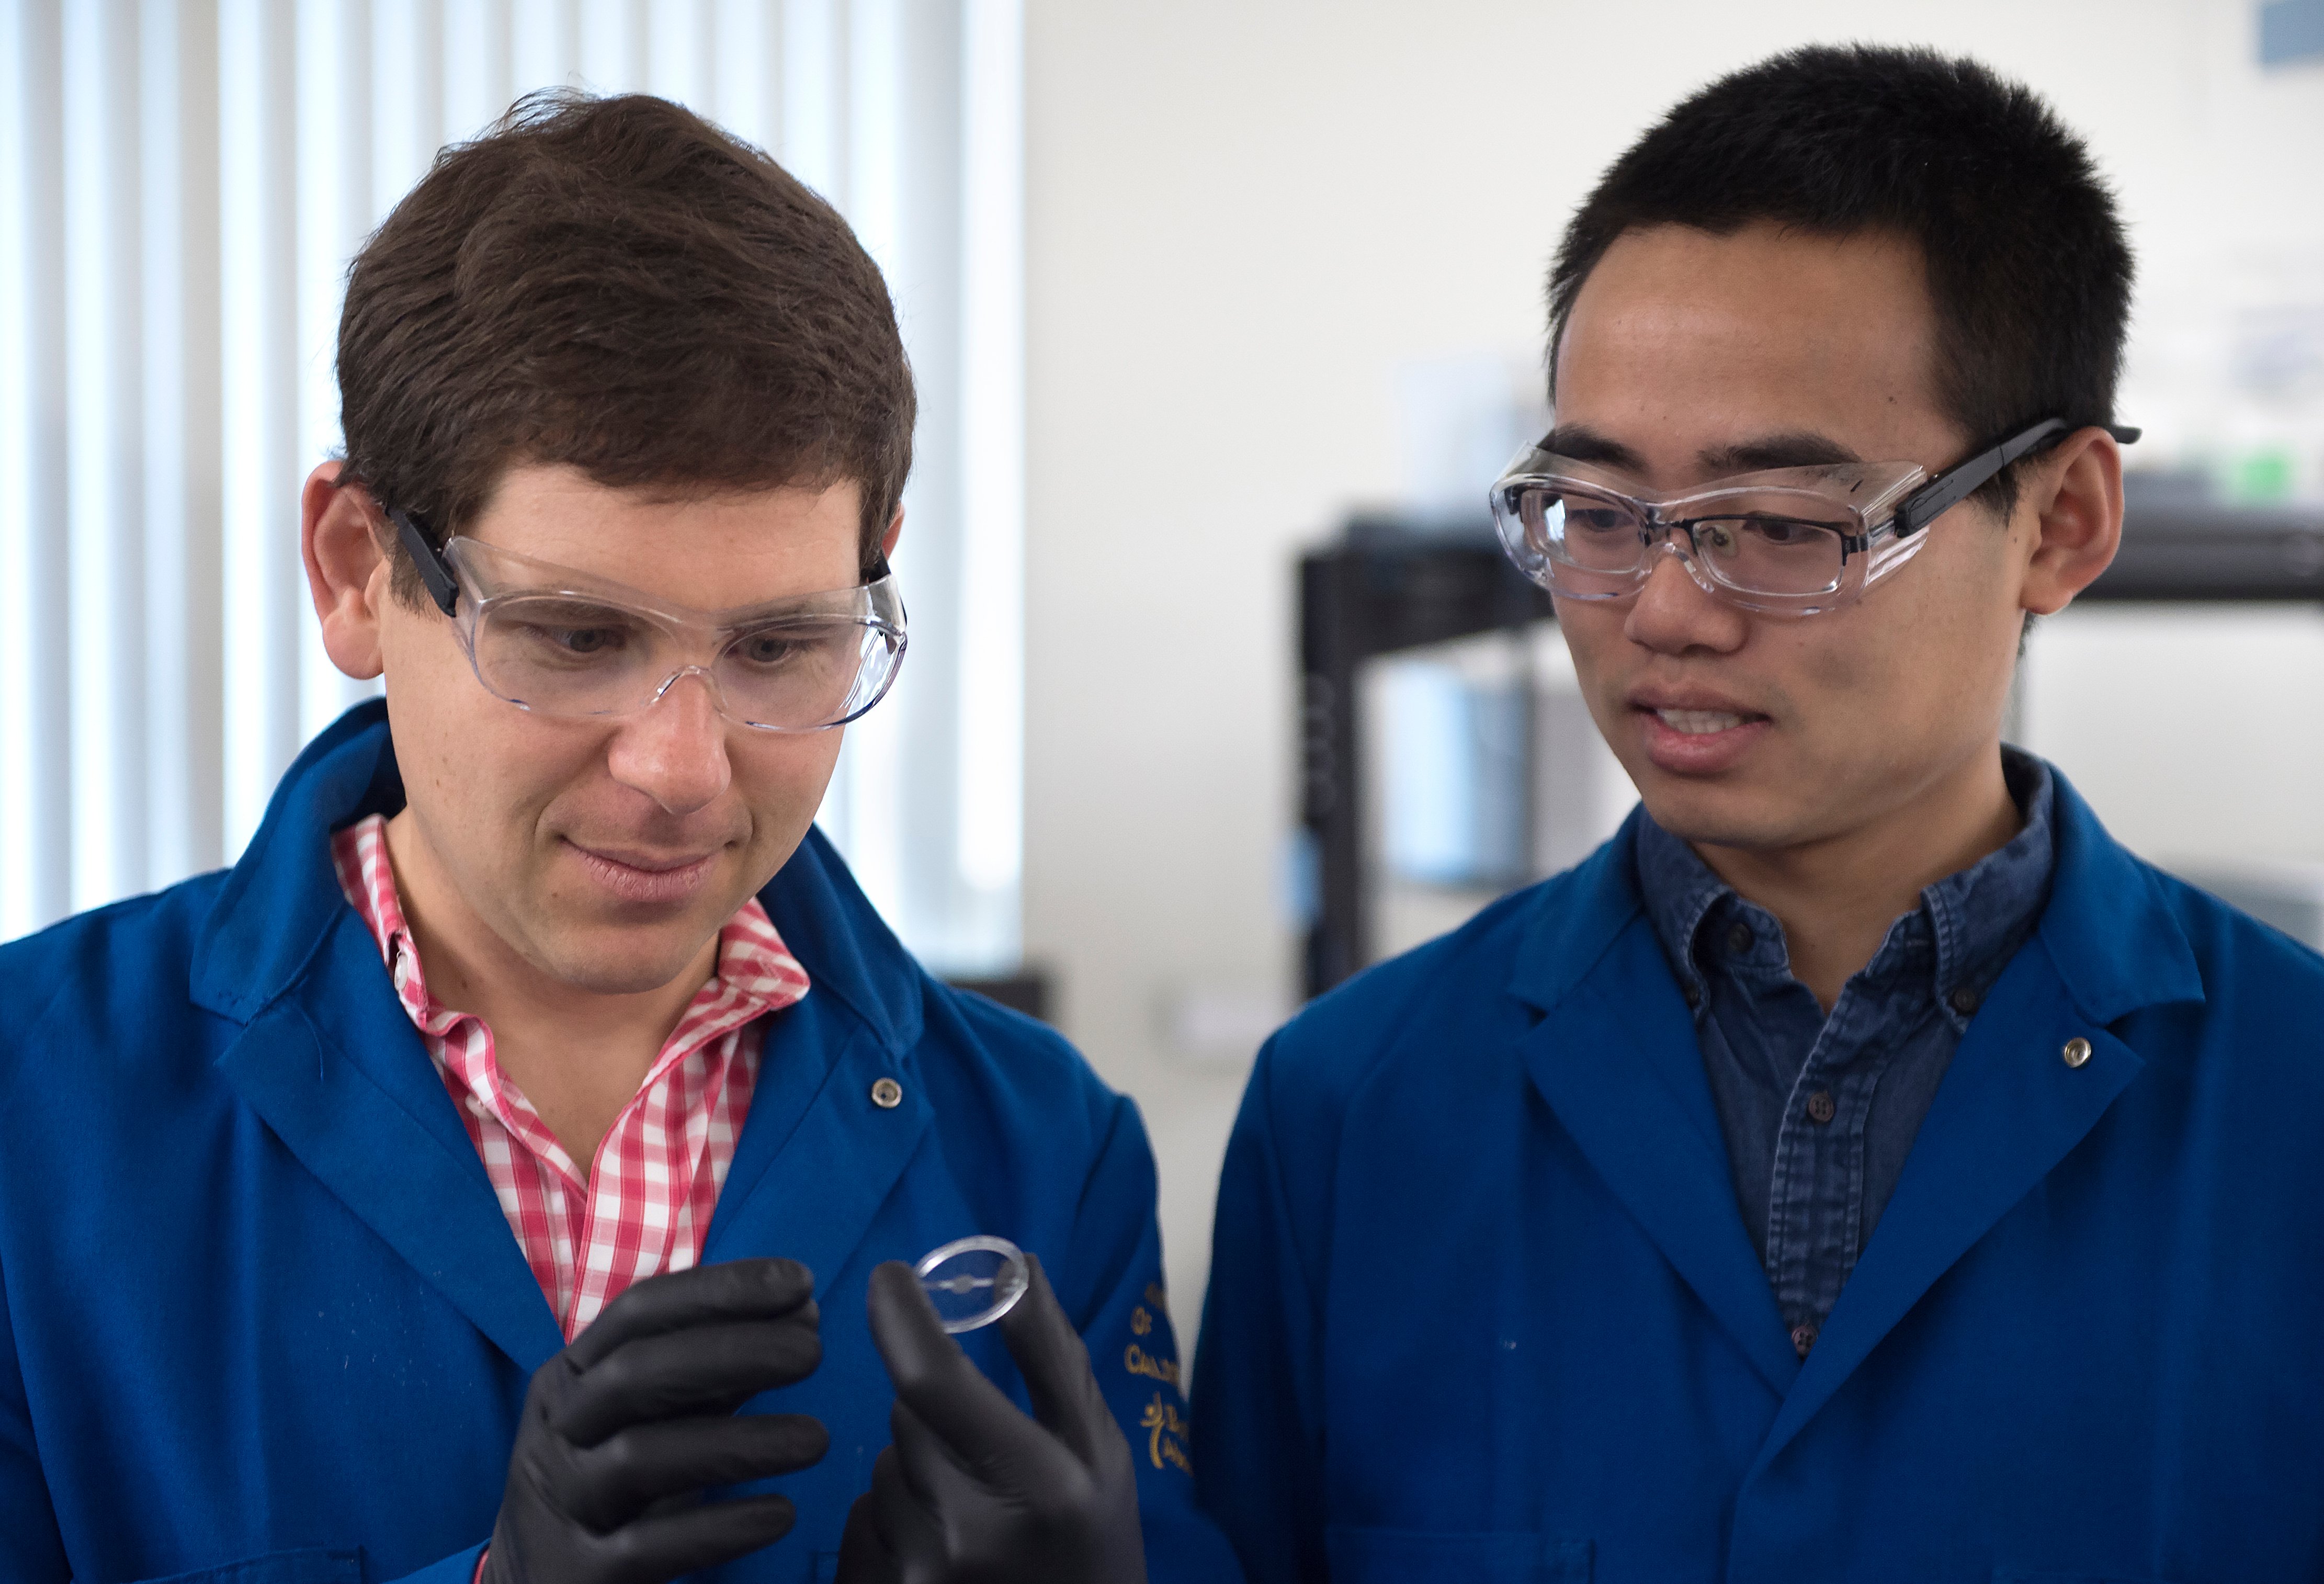 UCI engineering professor Alon Gorodetsky and doctoral student Chengyi Xu have achieved a breakthrough, inventing a stretchy new material modeled after both squid skin and Hollywood dinosaurs with remarkable properties.(Source: Steve Zylius / UCI)